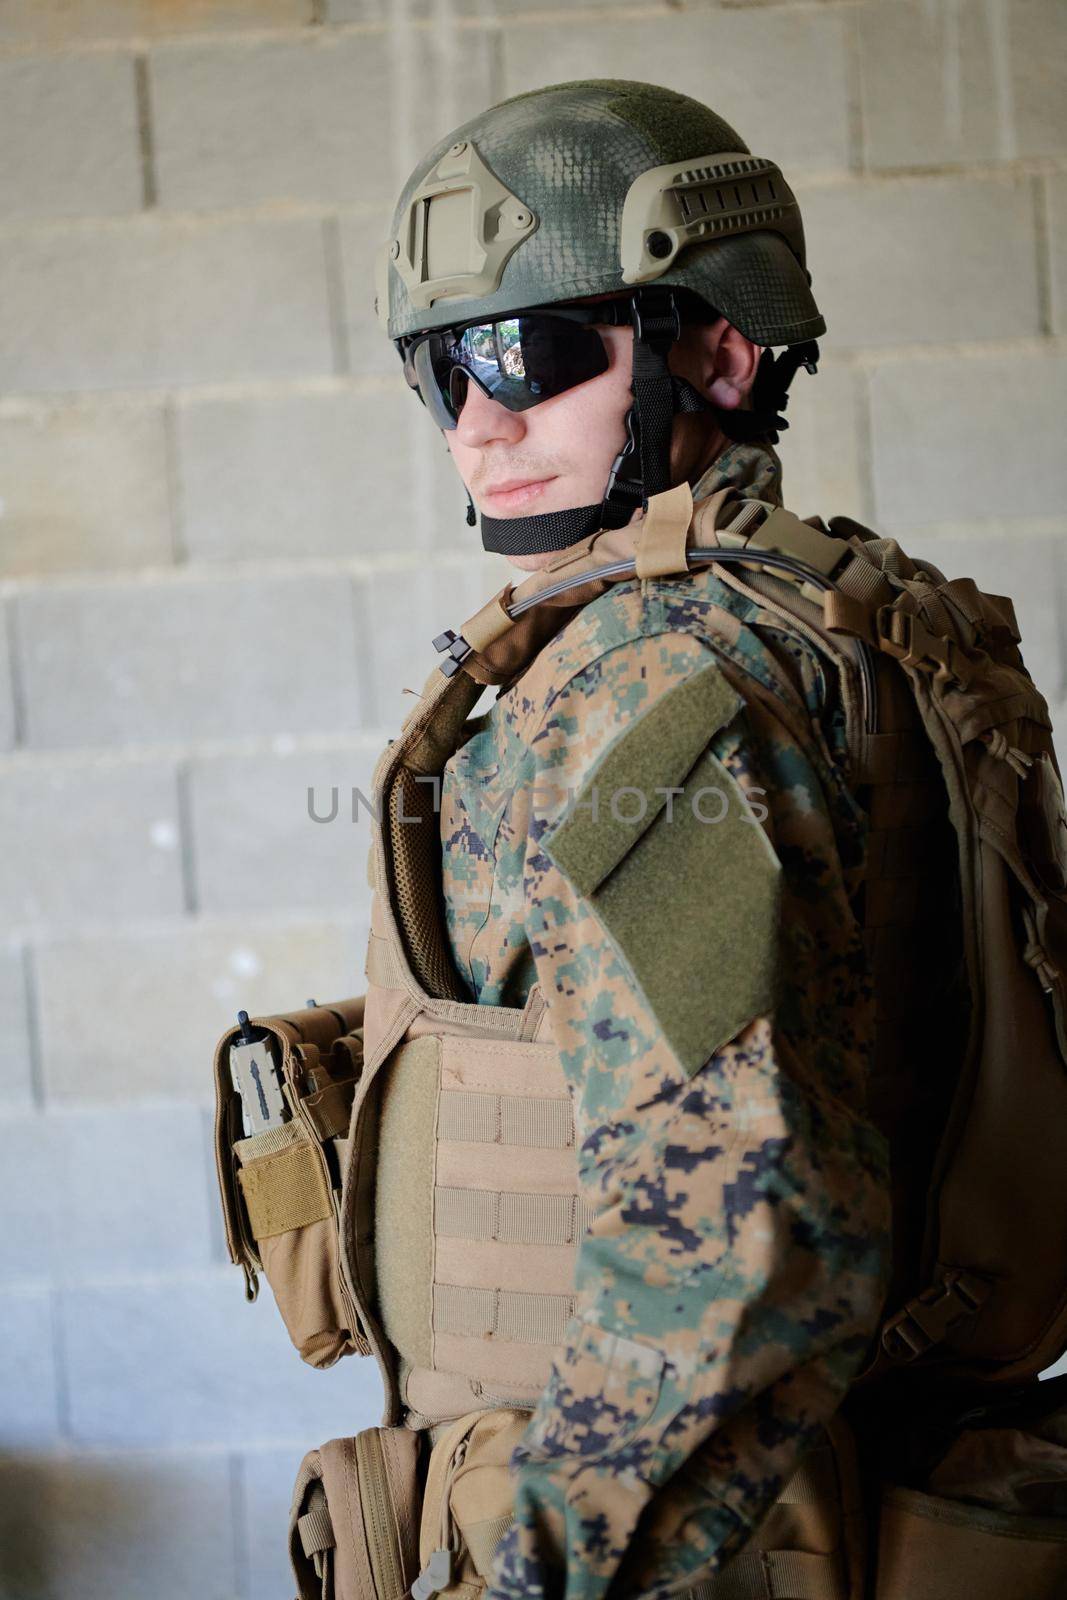 soldier portrait with  protective army tactical gear  against old brick wall